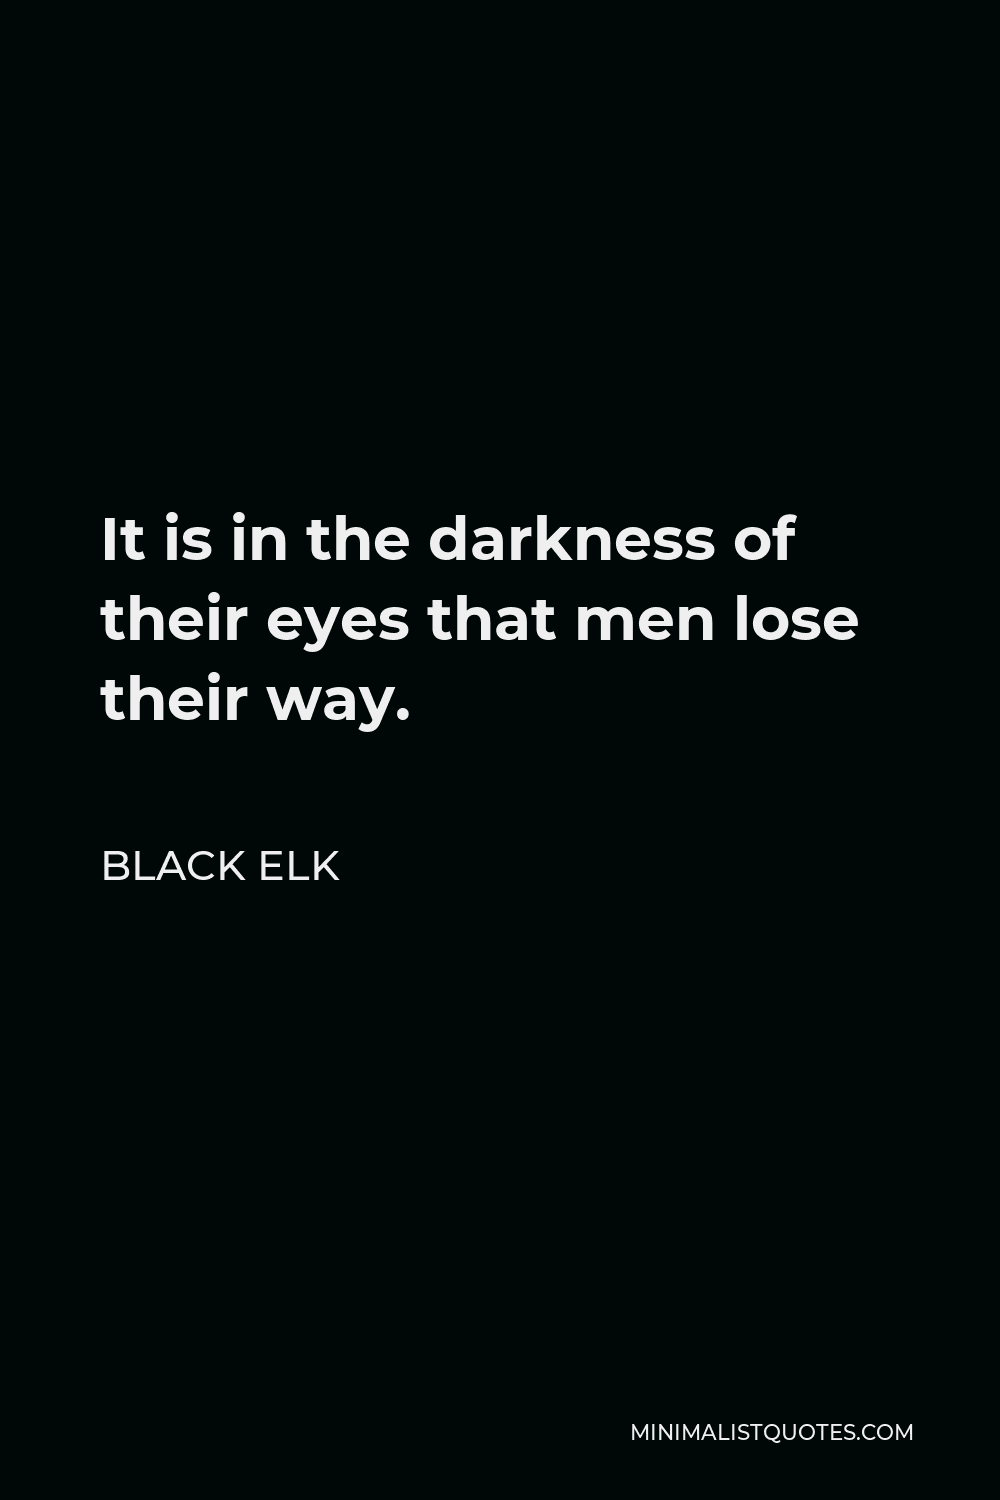 Black Elk Quote - It is in the darkness of their eyes that men lose their way.